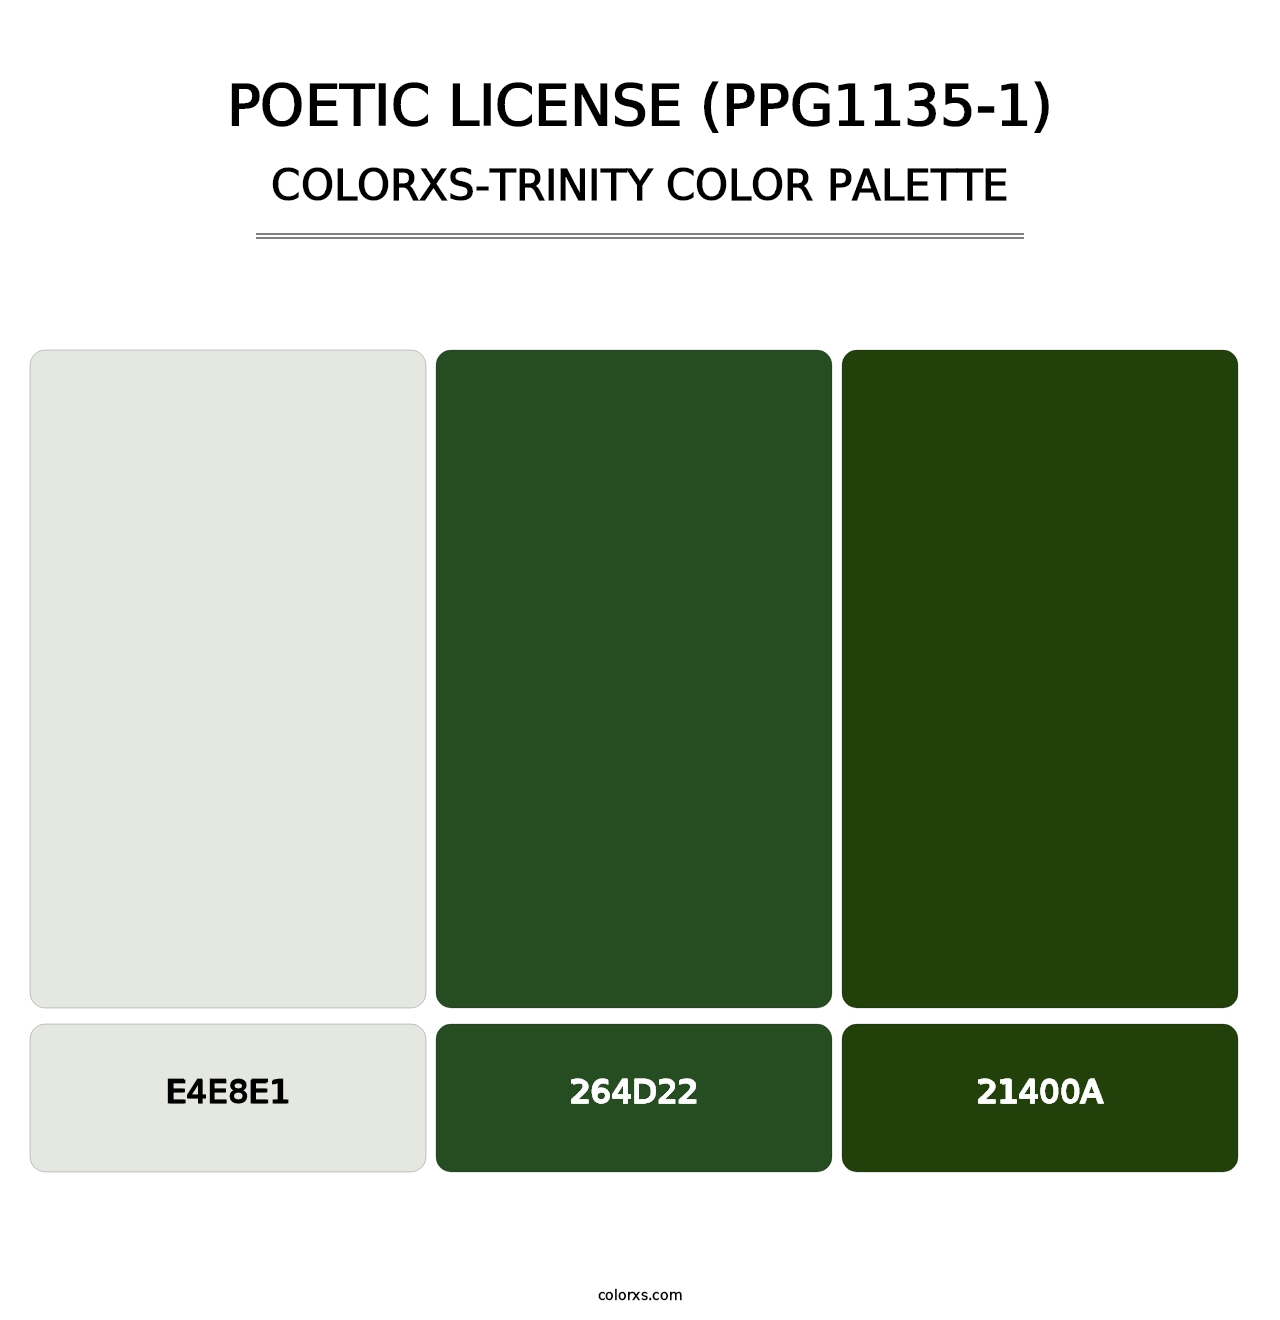 Poetic License (PPG1135-1) - Colorxs Trinity Palette